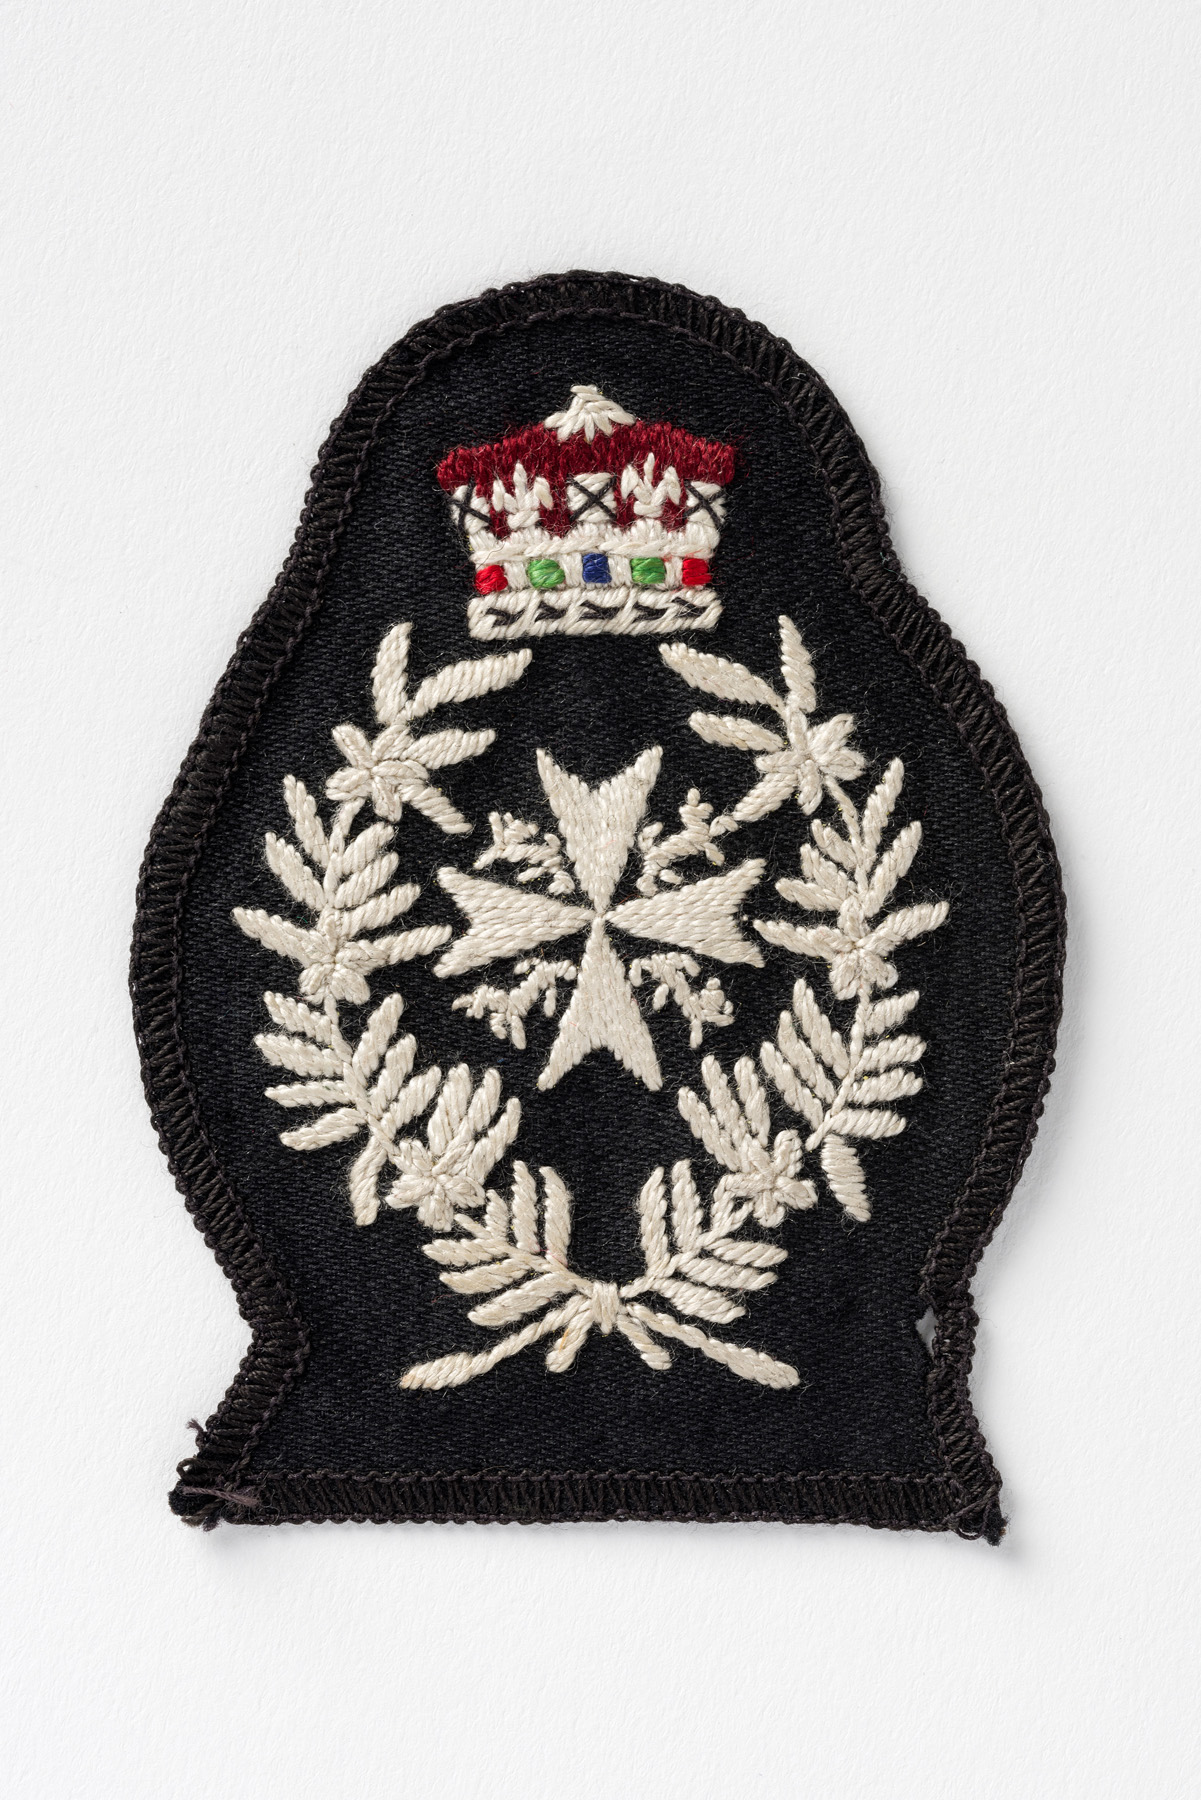 Colour photograph of a black cloth badge embroidered with the white eight-pointed of cross of St John, surmounted by a Crown and encircled by two branches of leaves